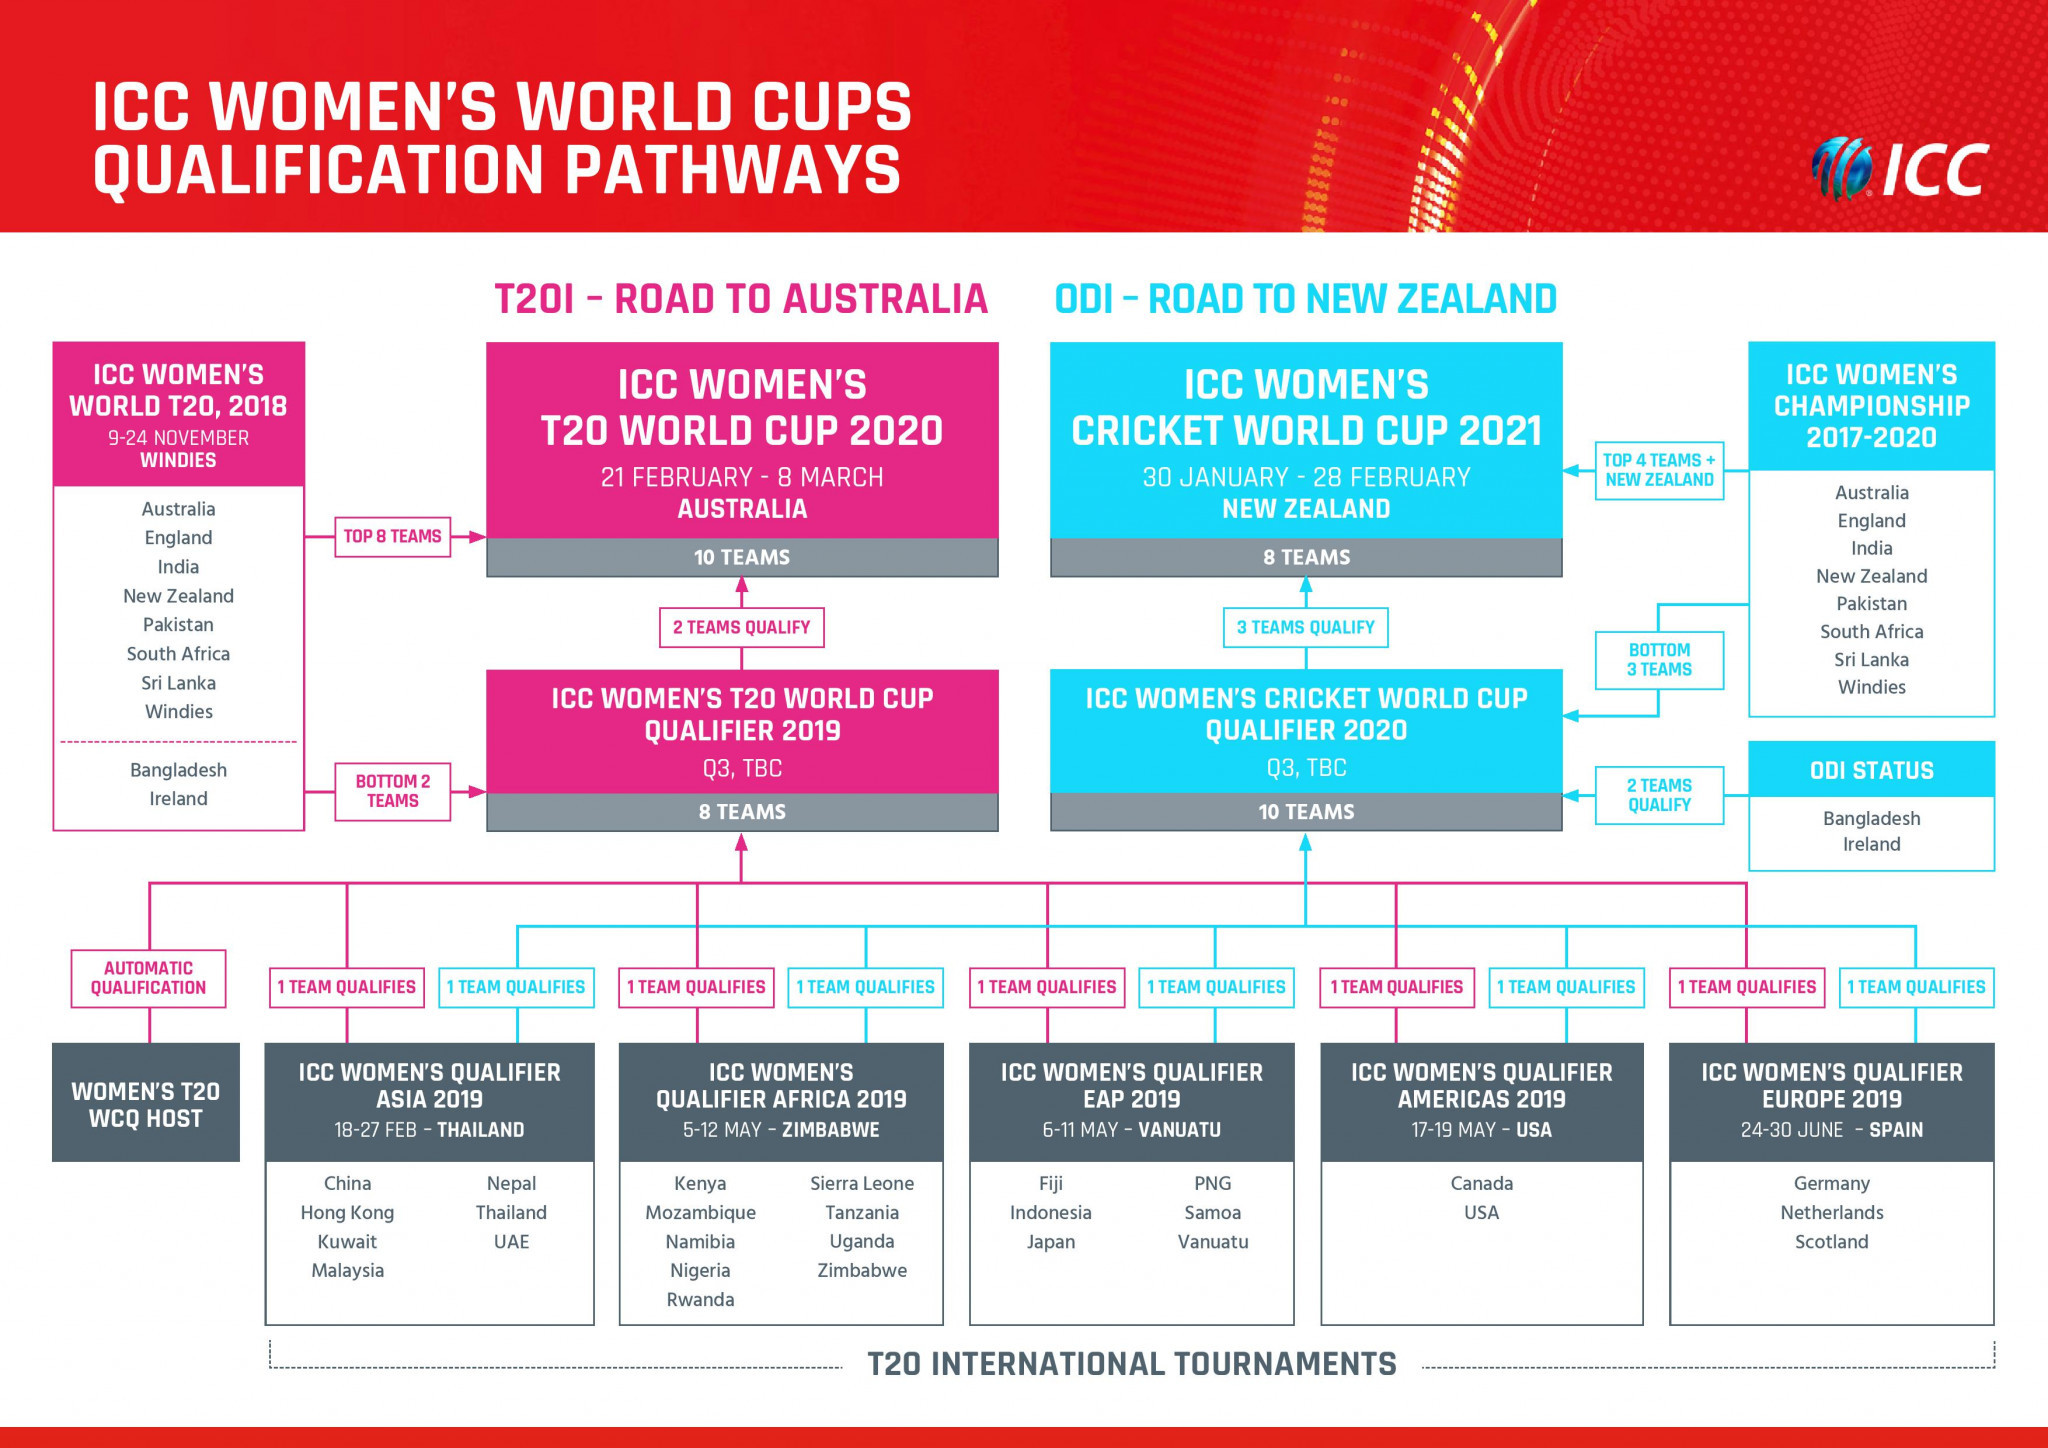 The ICC Women's Qualifier Asia will offer a place at the ICC Women's T20 World Cup Qualifier and the ICC Women's Cricket World Cup Qualifier ©ICC